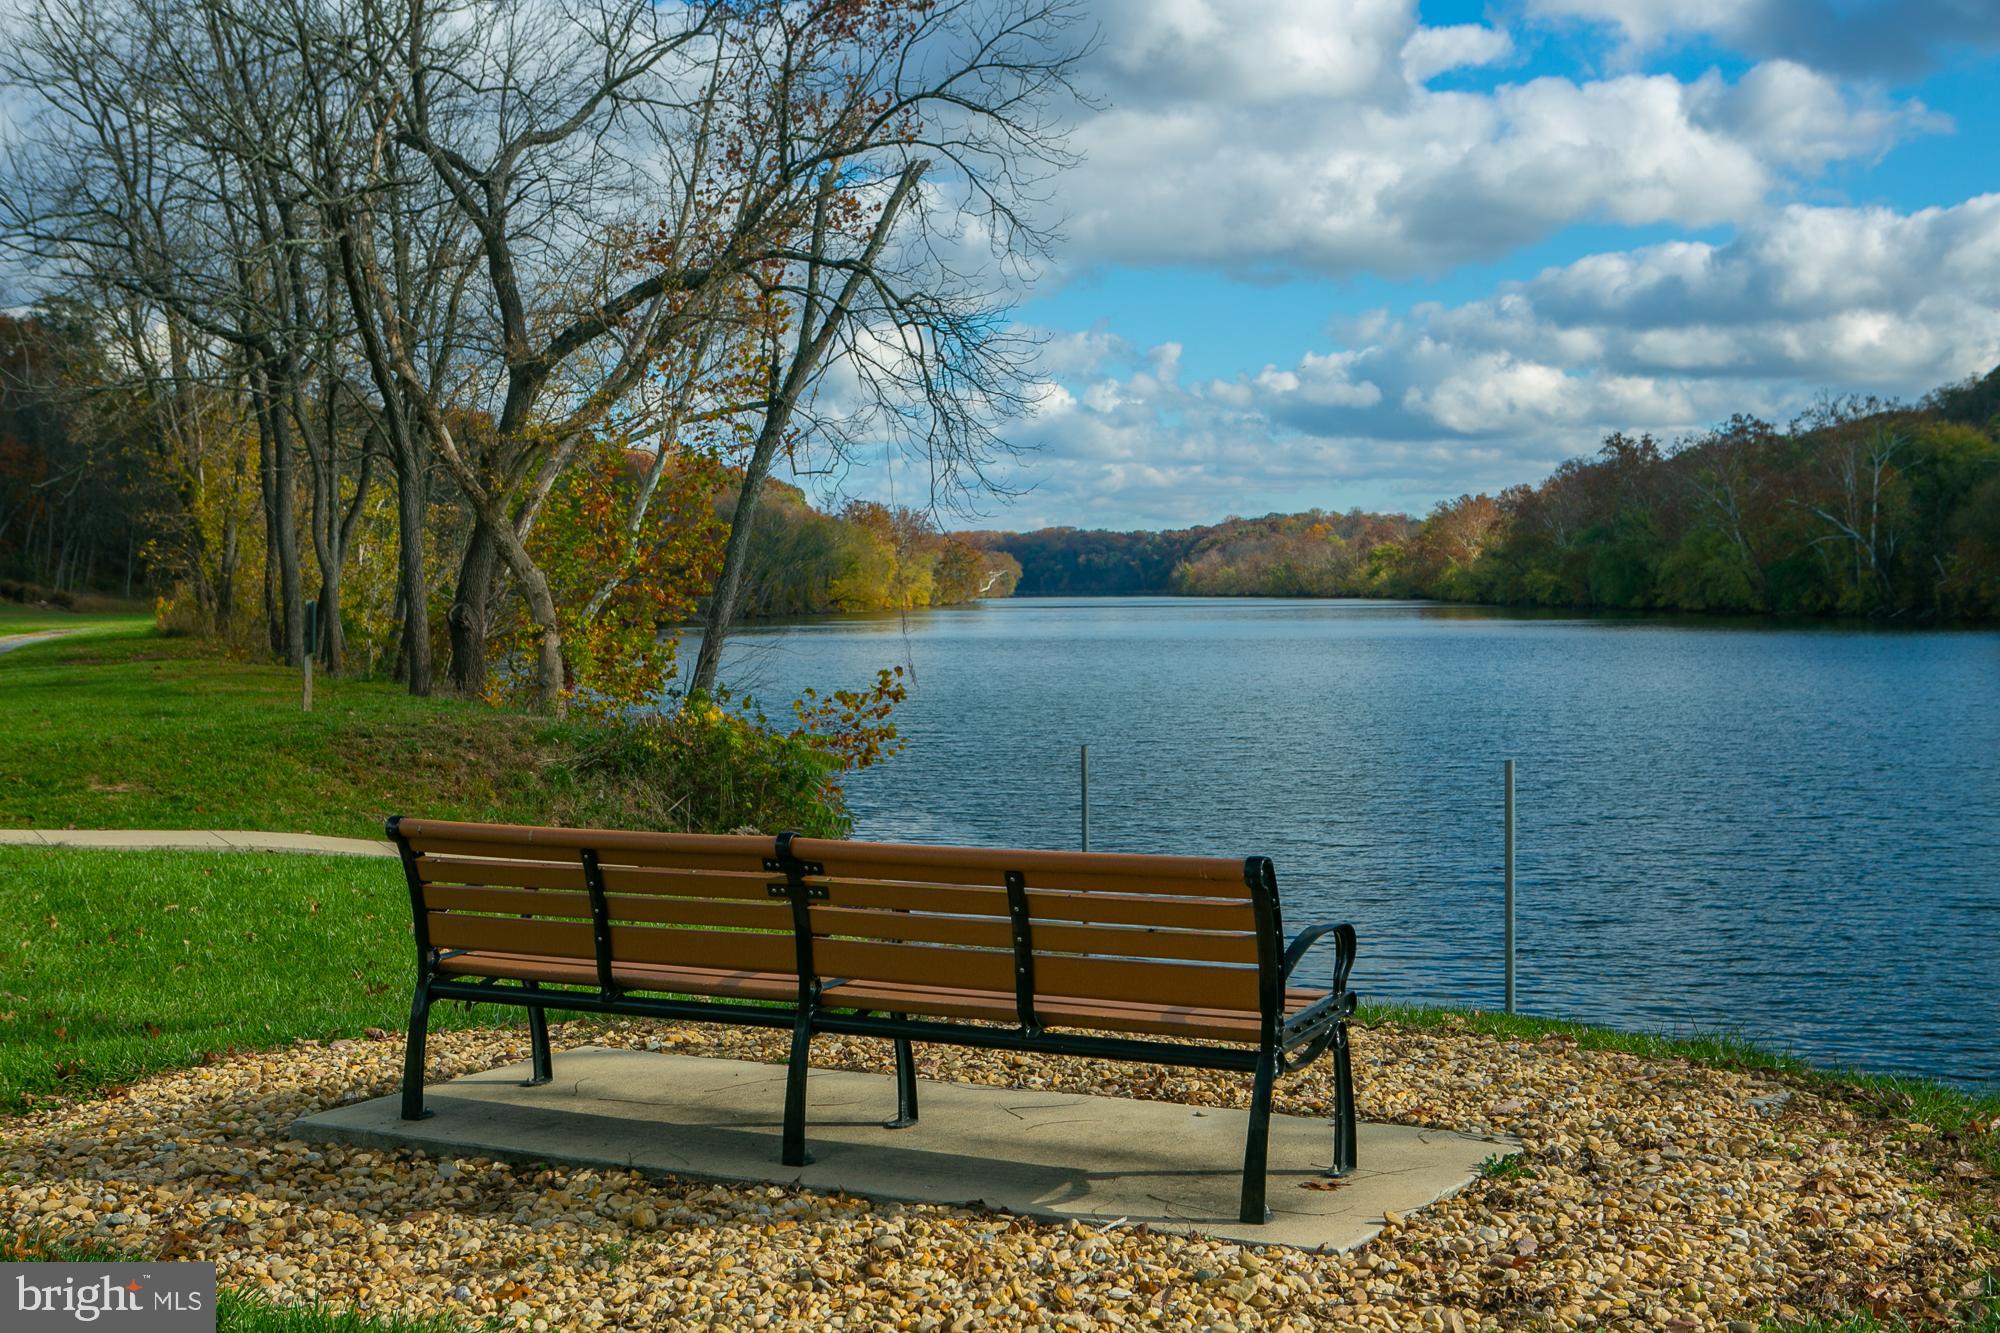 a view of a bench in the garden near a lake